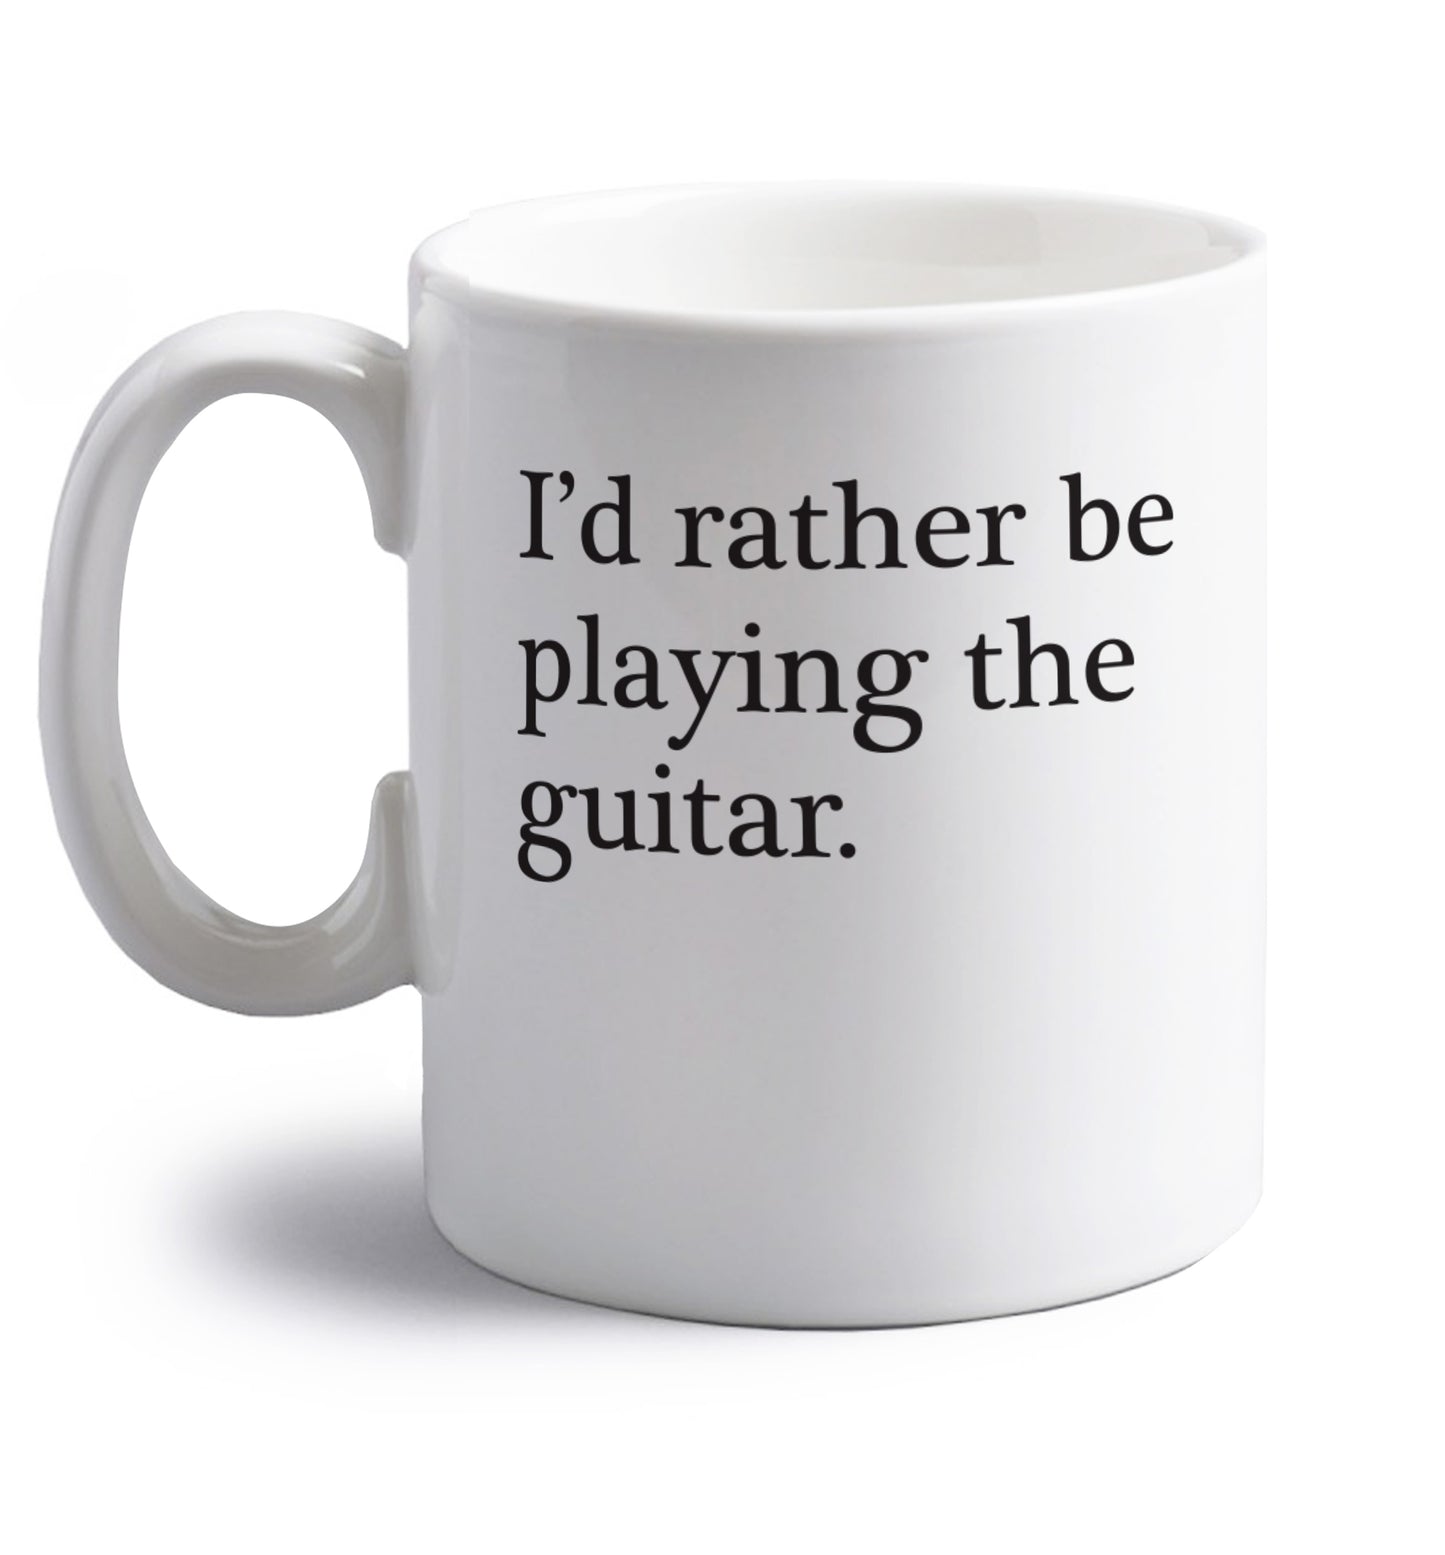 I'd rather be playing the guitar right handed white ceramic mug 